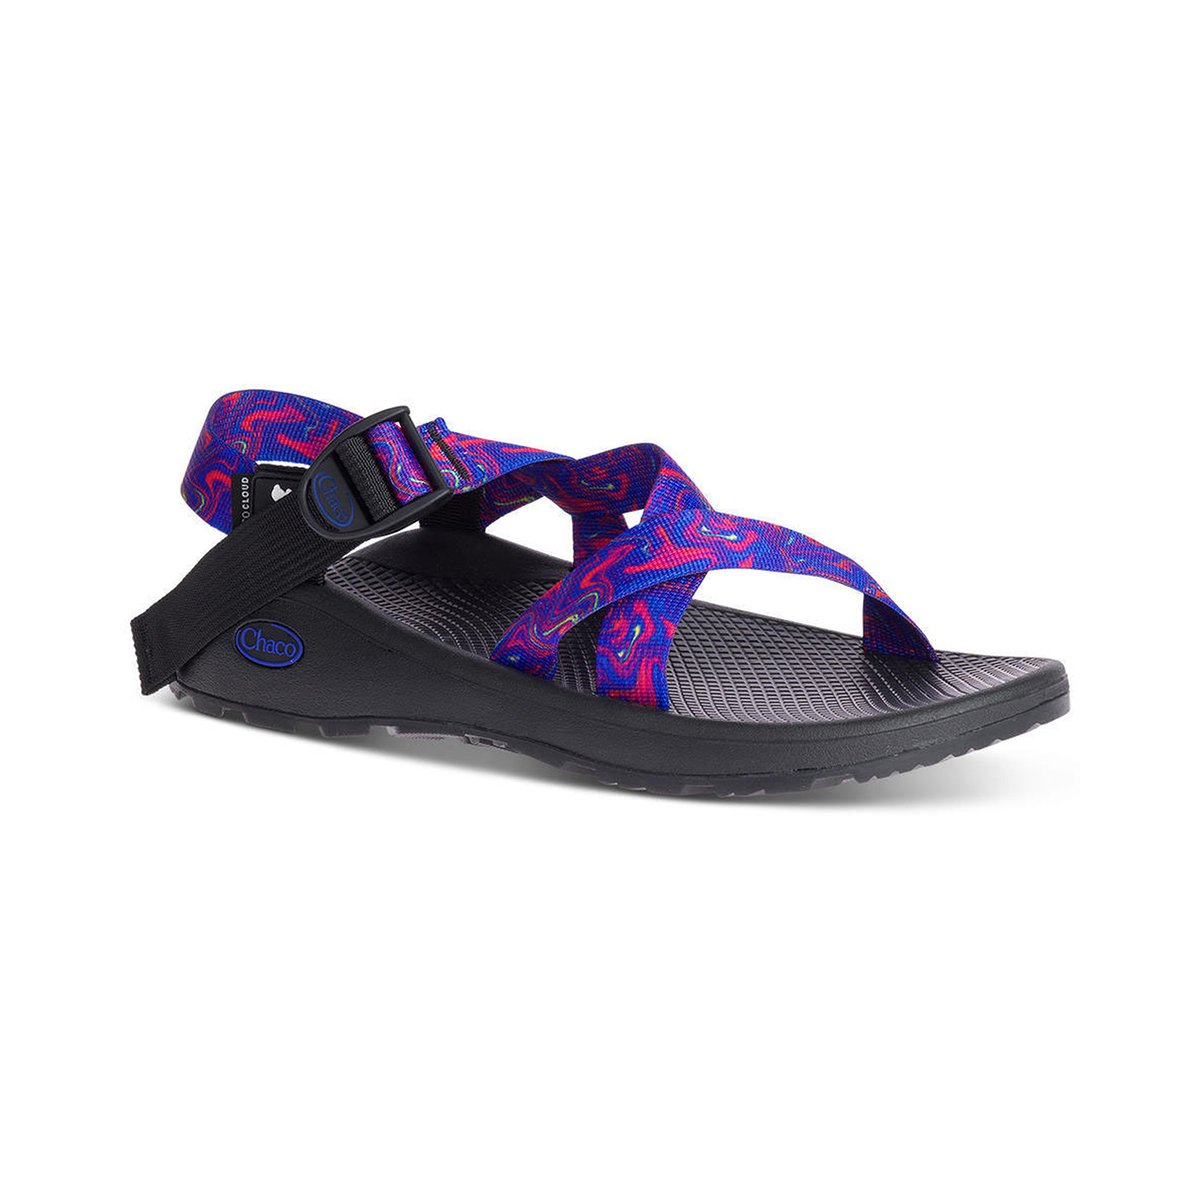 Women's ZCLOUD 2 by Chaco